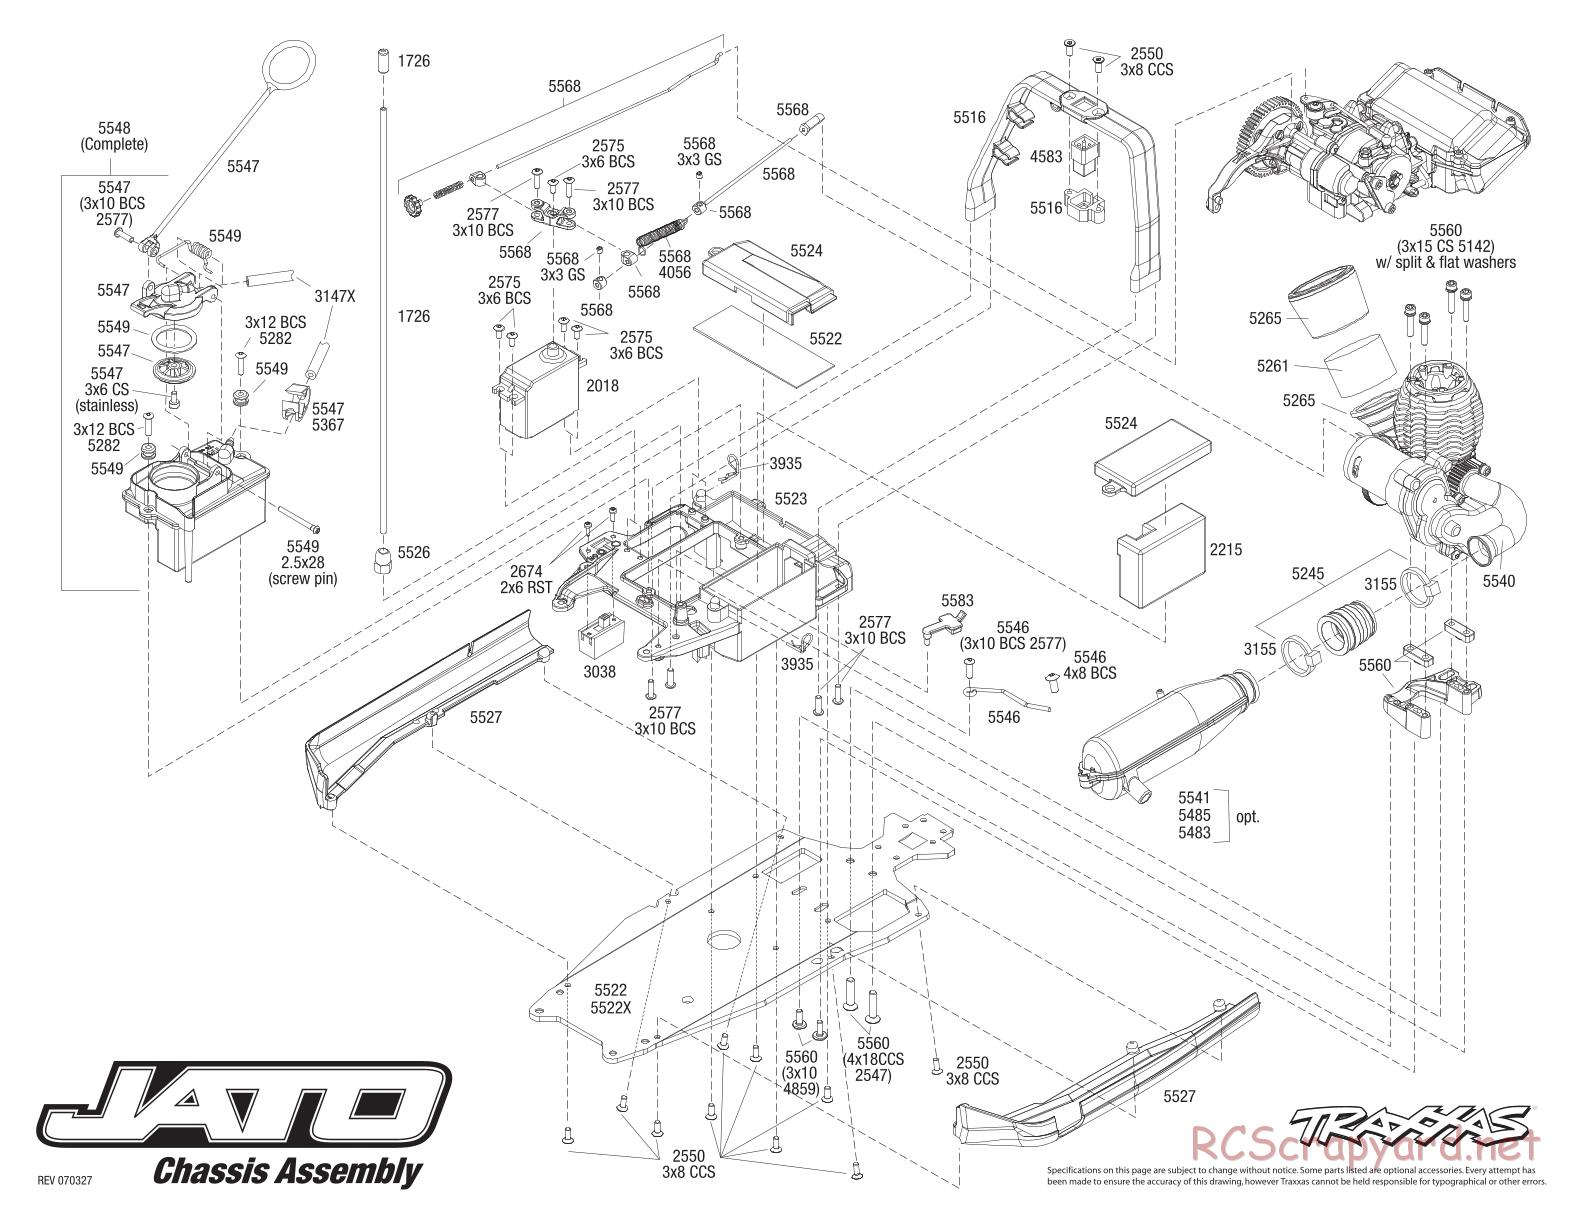 Traxxas - Jato 2.5 (2005) - Exploded Views - Page 1